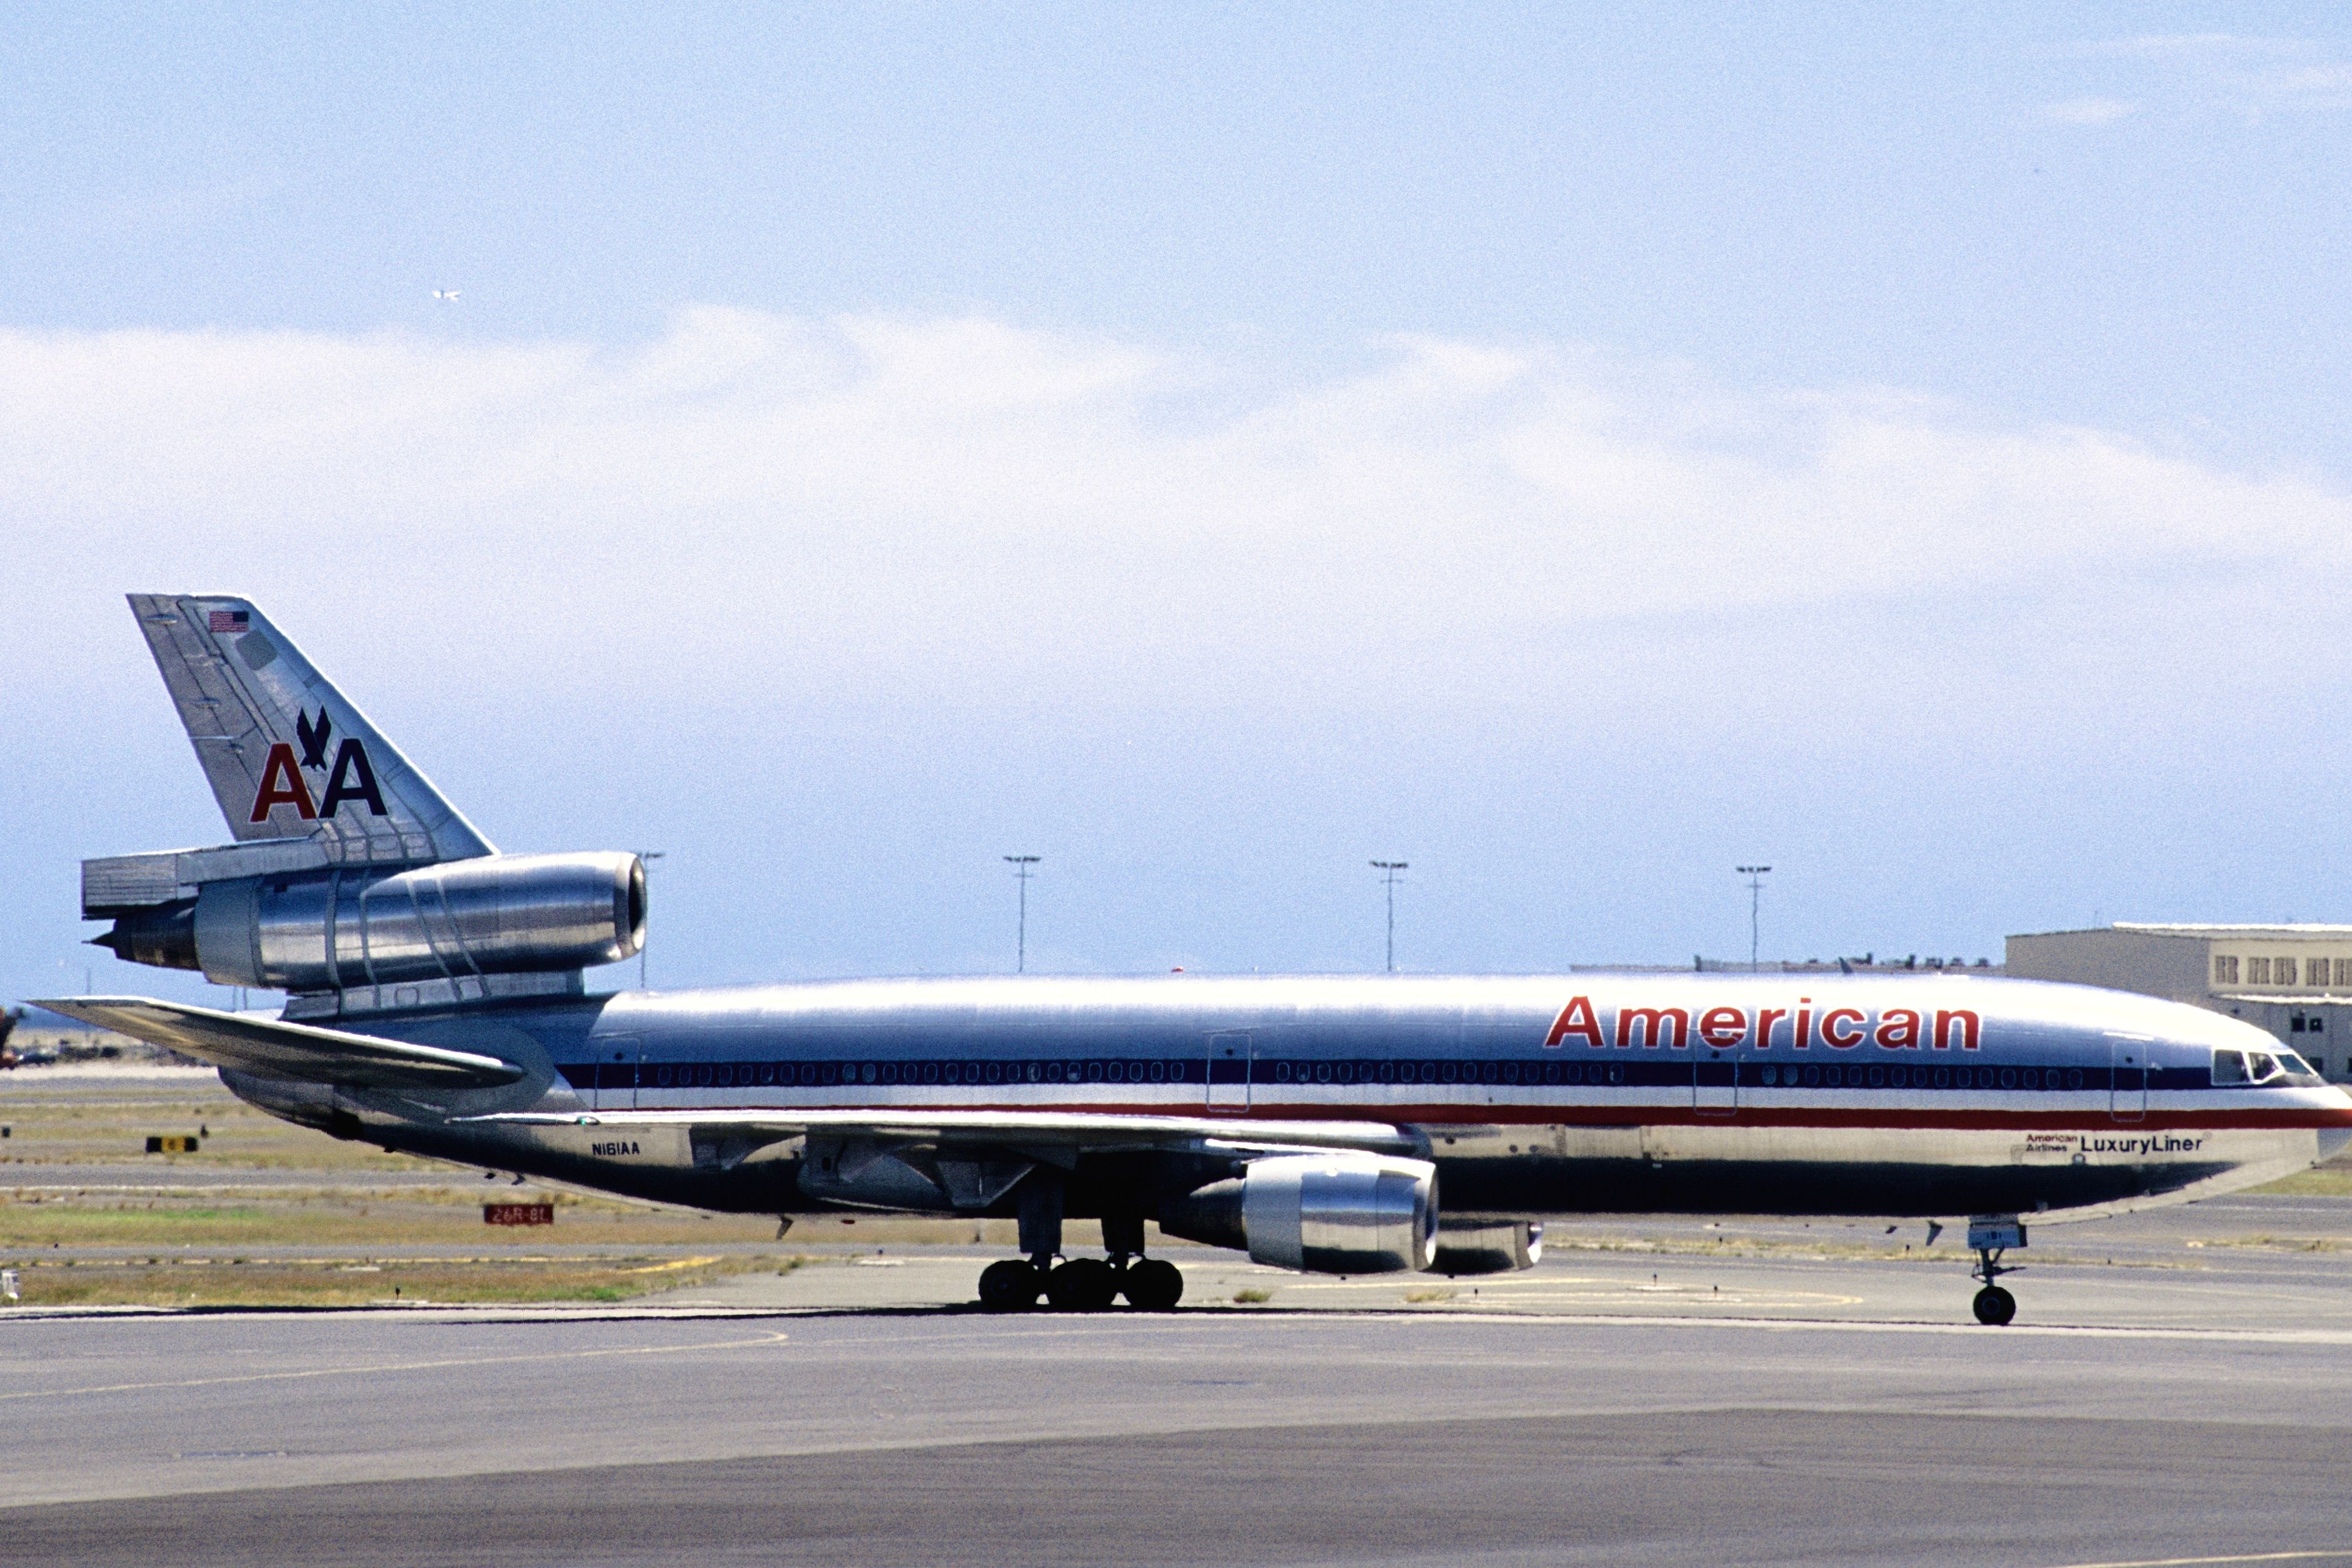 American Airlines DC-10-10 on the ground